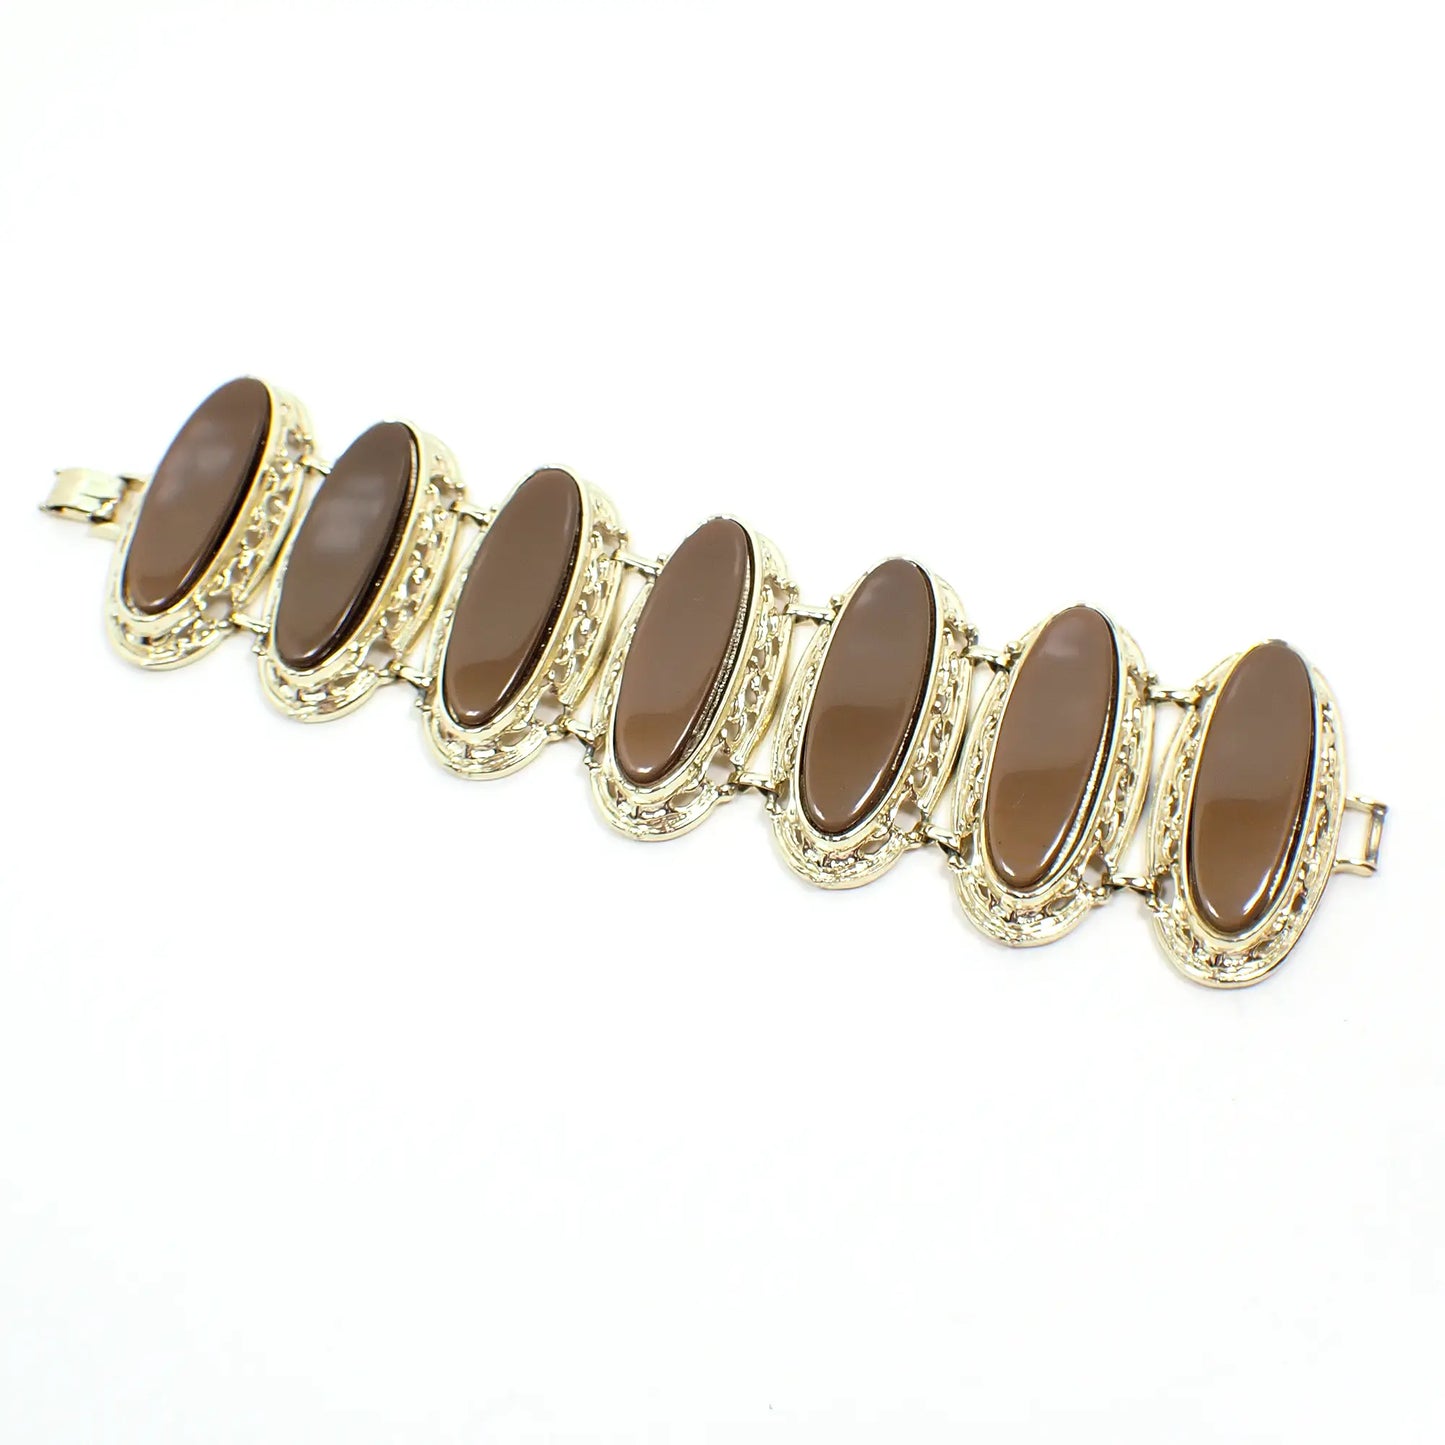 1950's Wide Pearly Brown Thermoset Oval Vintage Link Bracelet